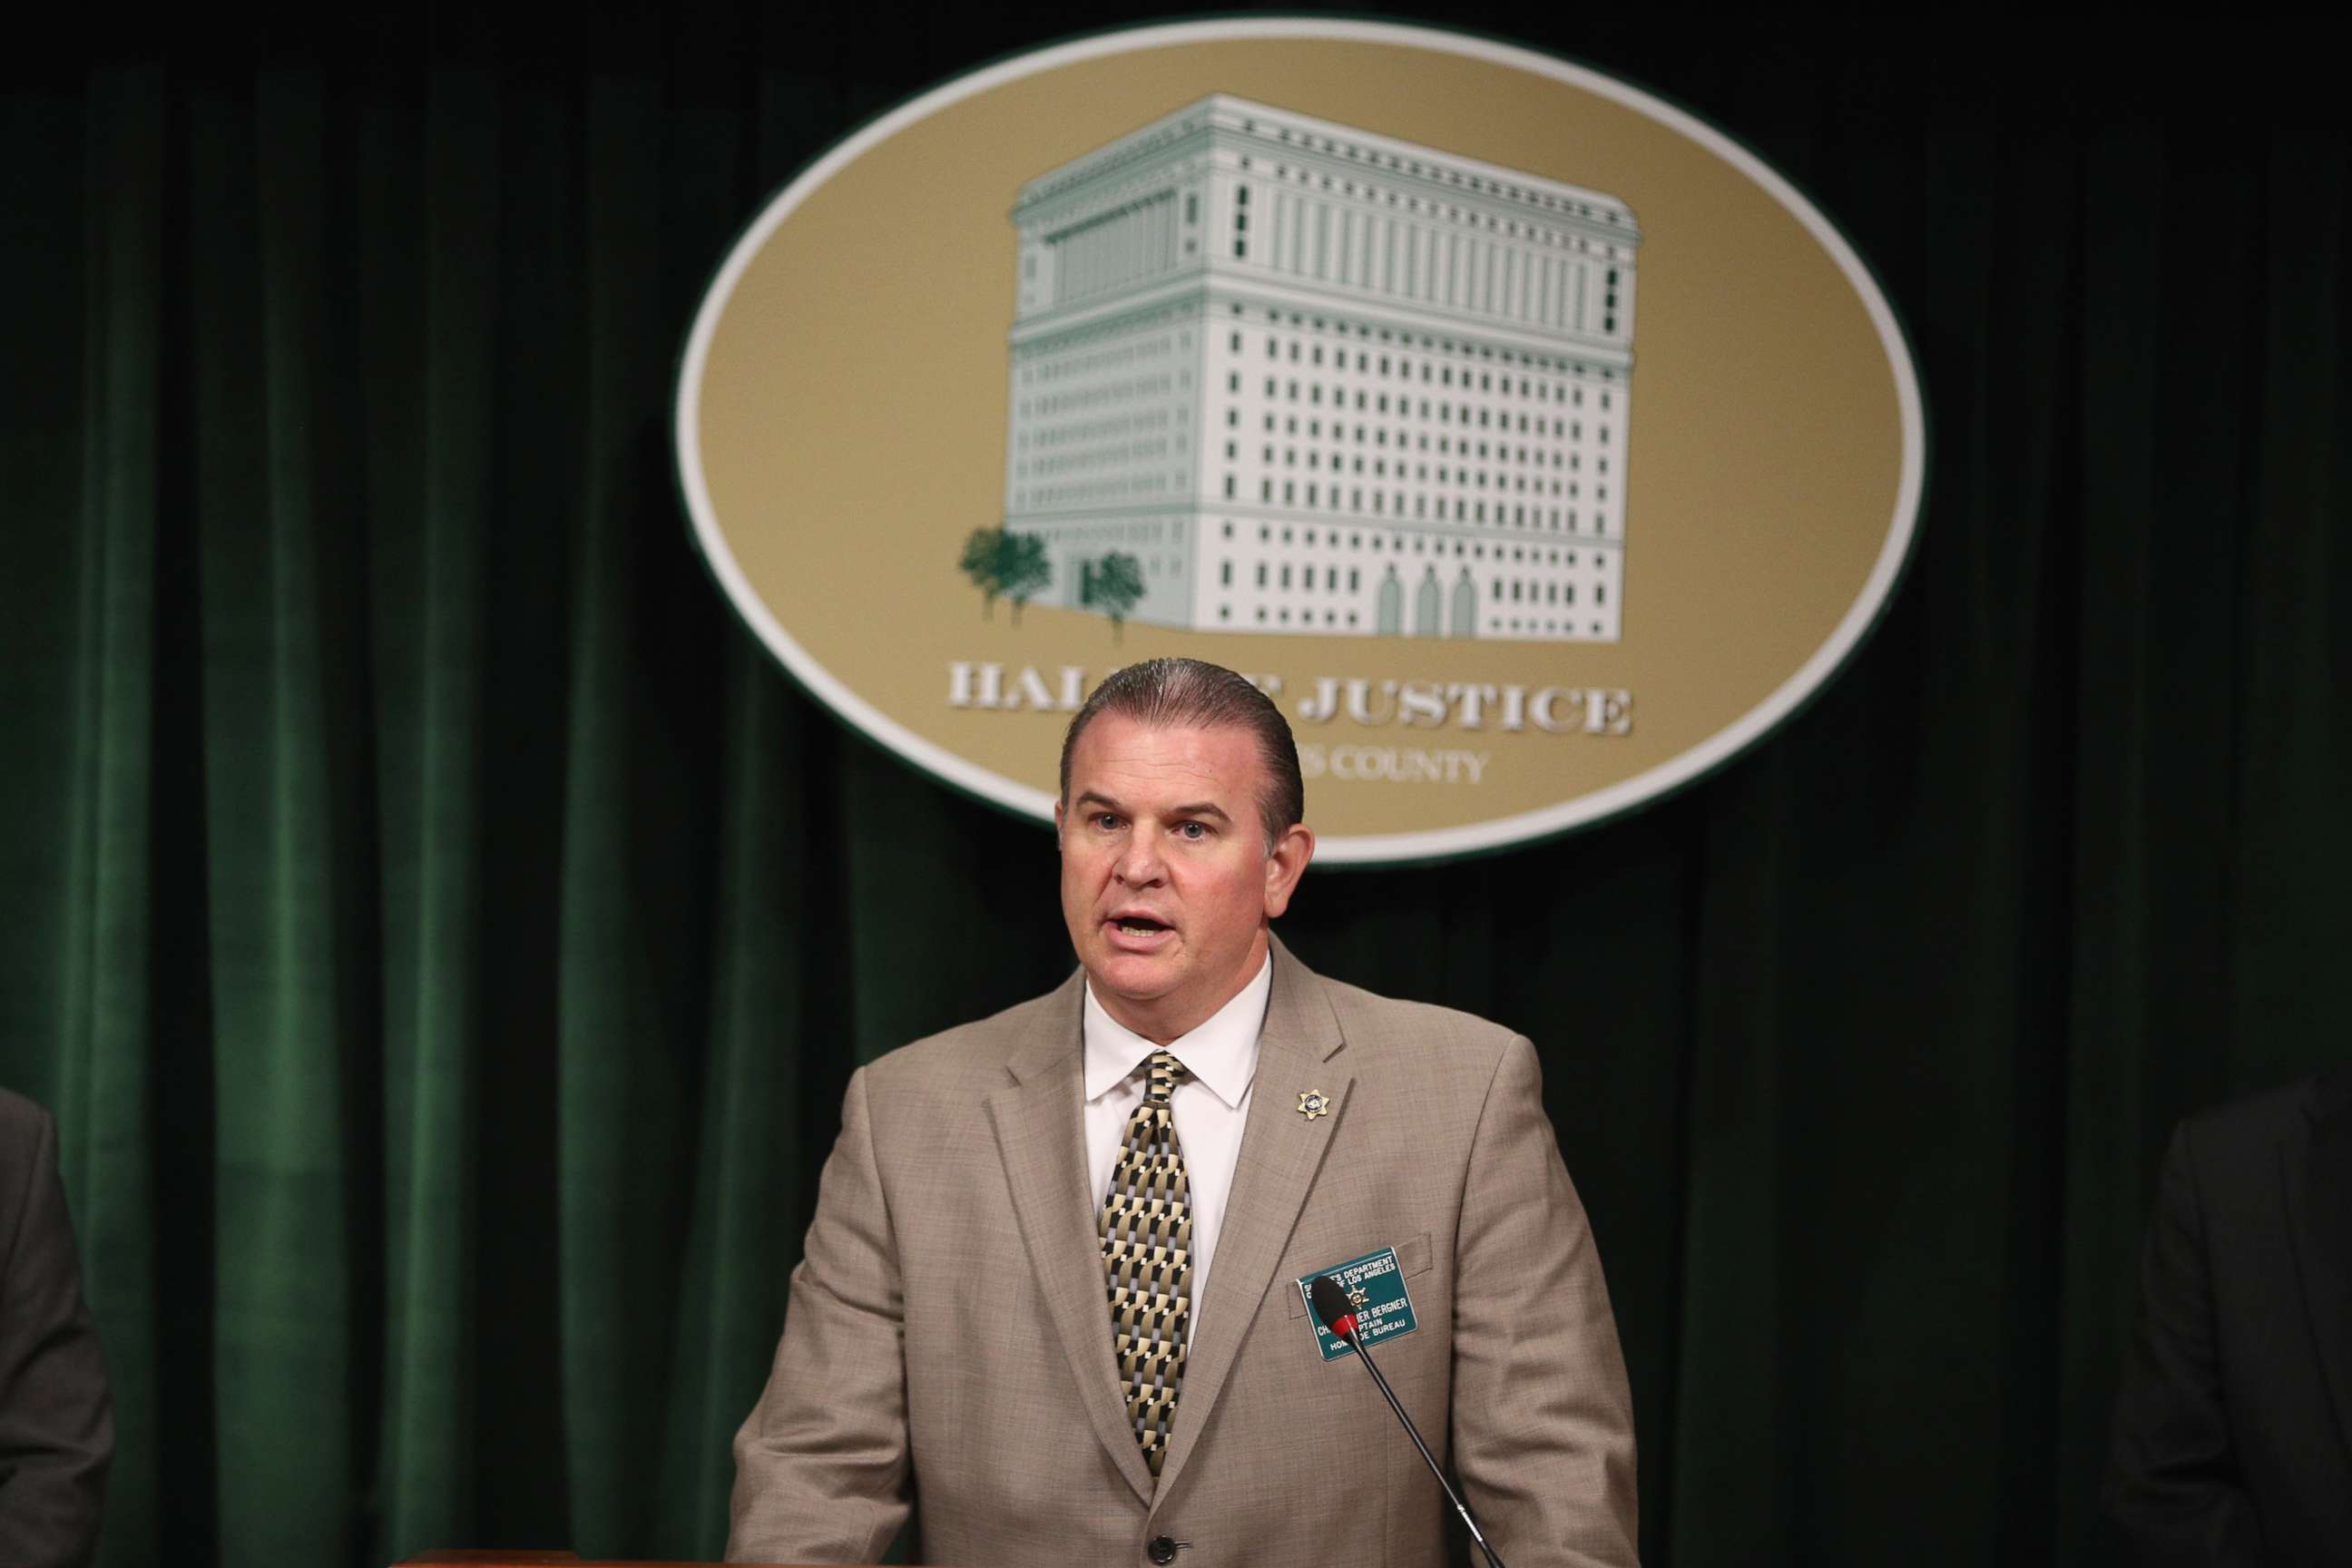 PHOTO: Captain Christopher Bergner of the Los Angeles County Sheriff's Department Homicide Bureau discusses the most recent details of the Natalie Wood death investigation at Hall of Justice, Feb. 5, 2018, in Los Angeles.